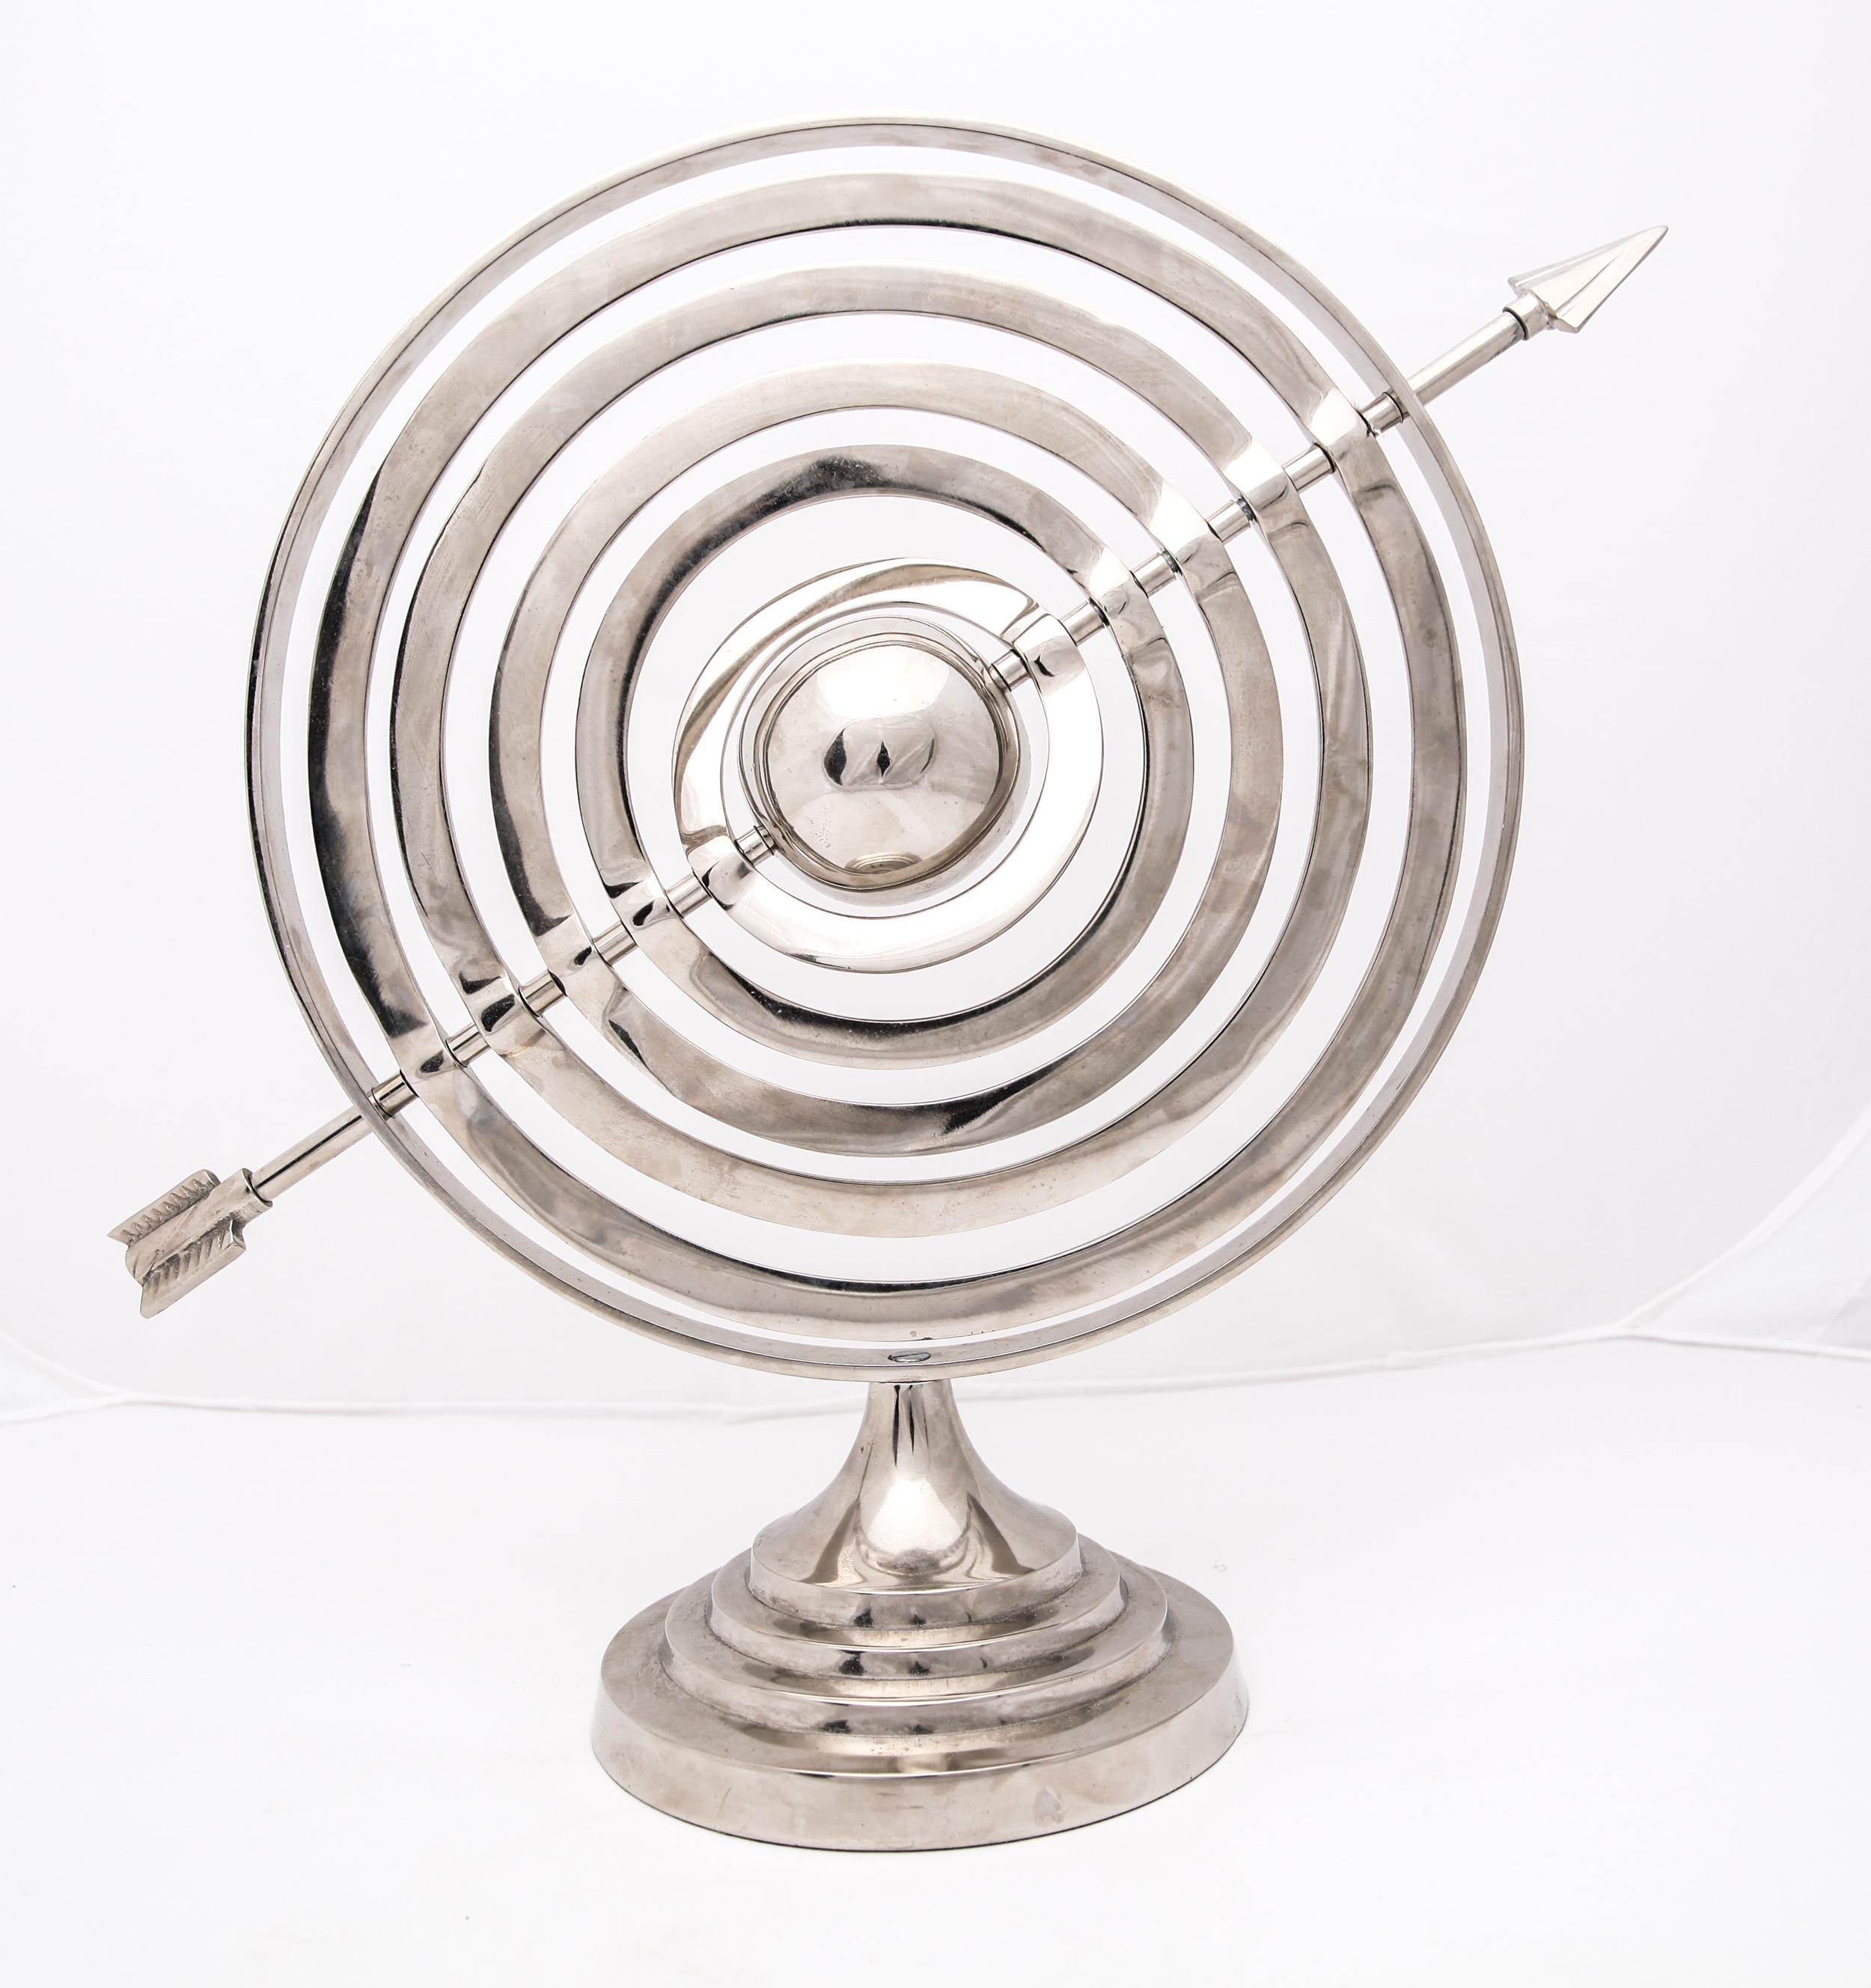 Modern astrolabe armillary sphere in polished aluminum, made in the 20th century. The piece is in great condition with very minor wear and patina to the surfaces.